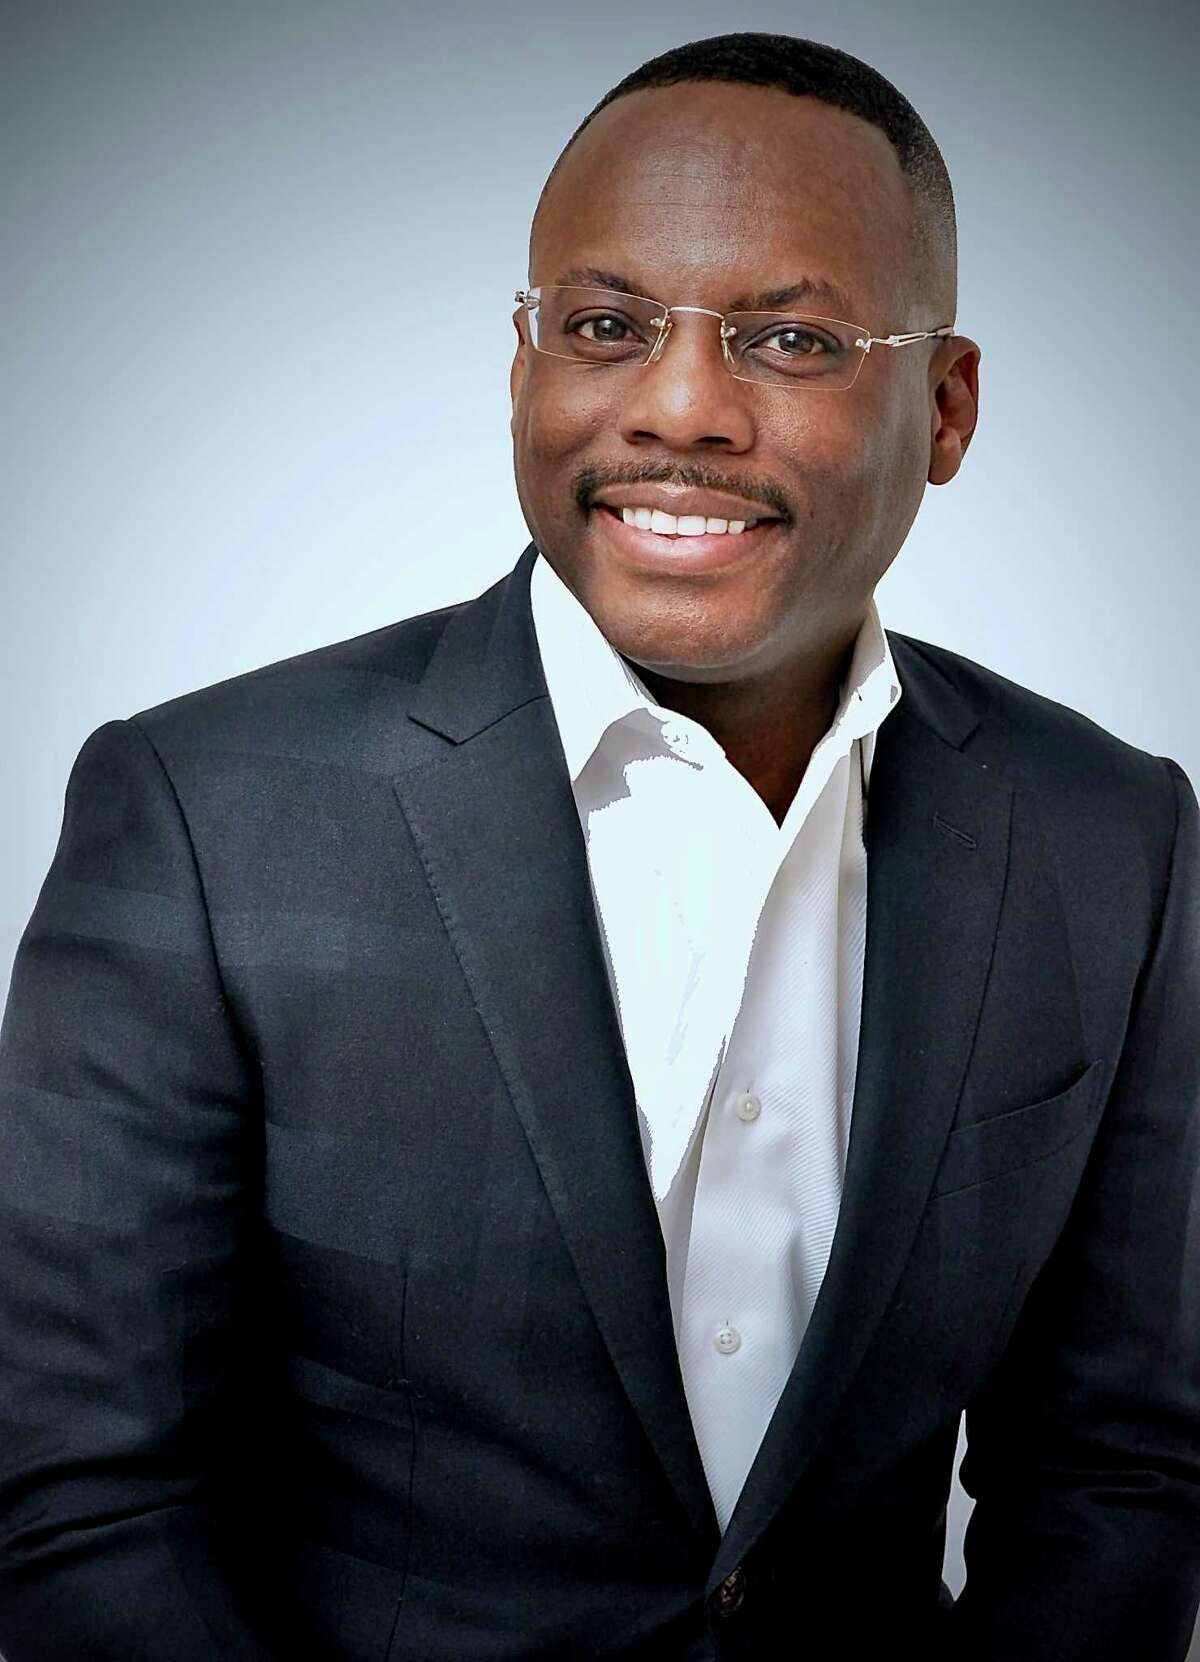 Michael Matthews, Synchrony’s chief diversity and corporate responsibility officer